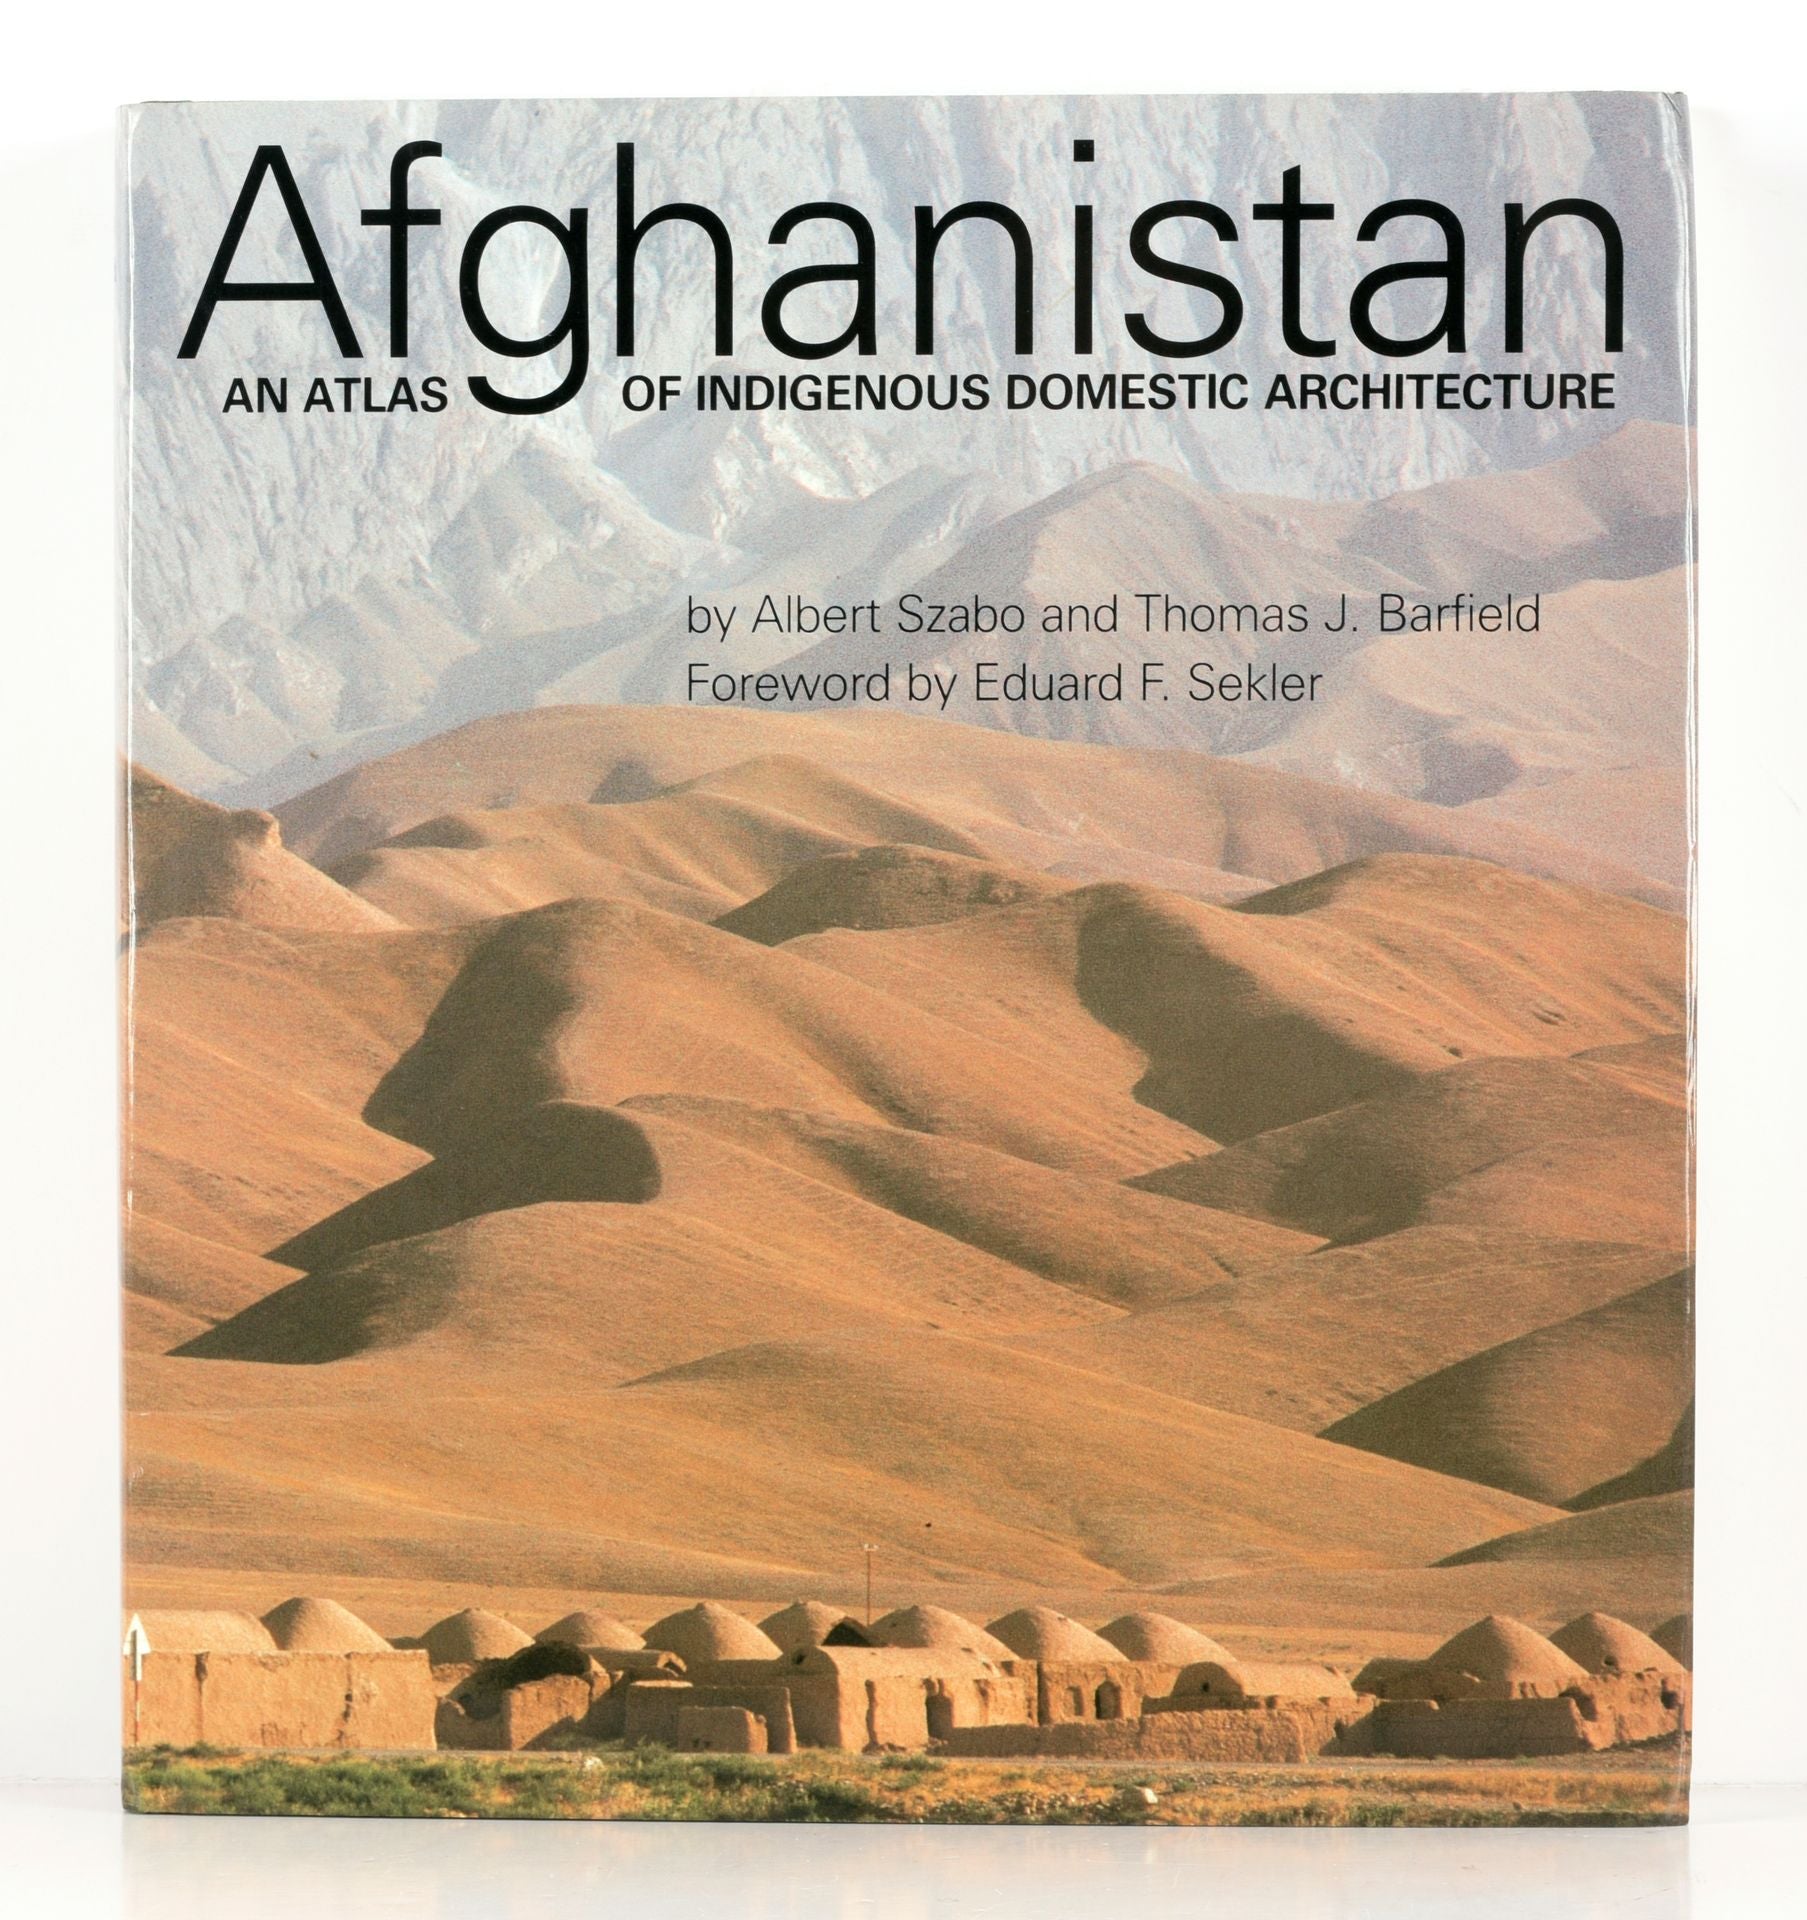 Afghanistan, an Atlas of Indigenous Domestic Architecture.